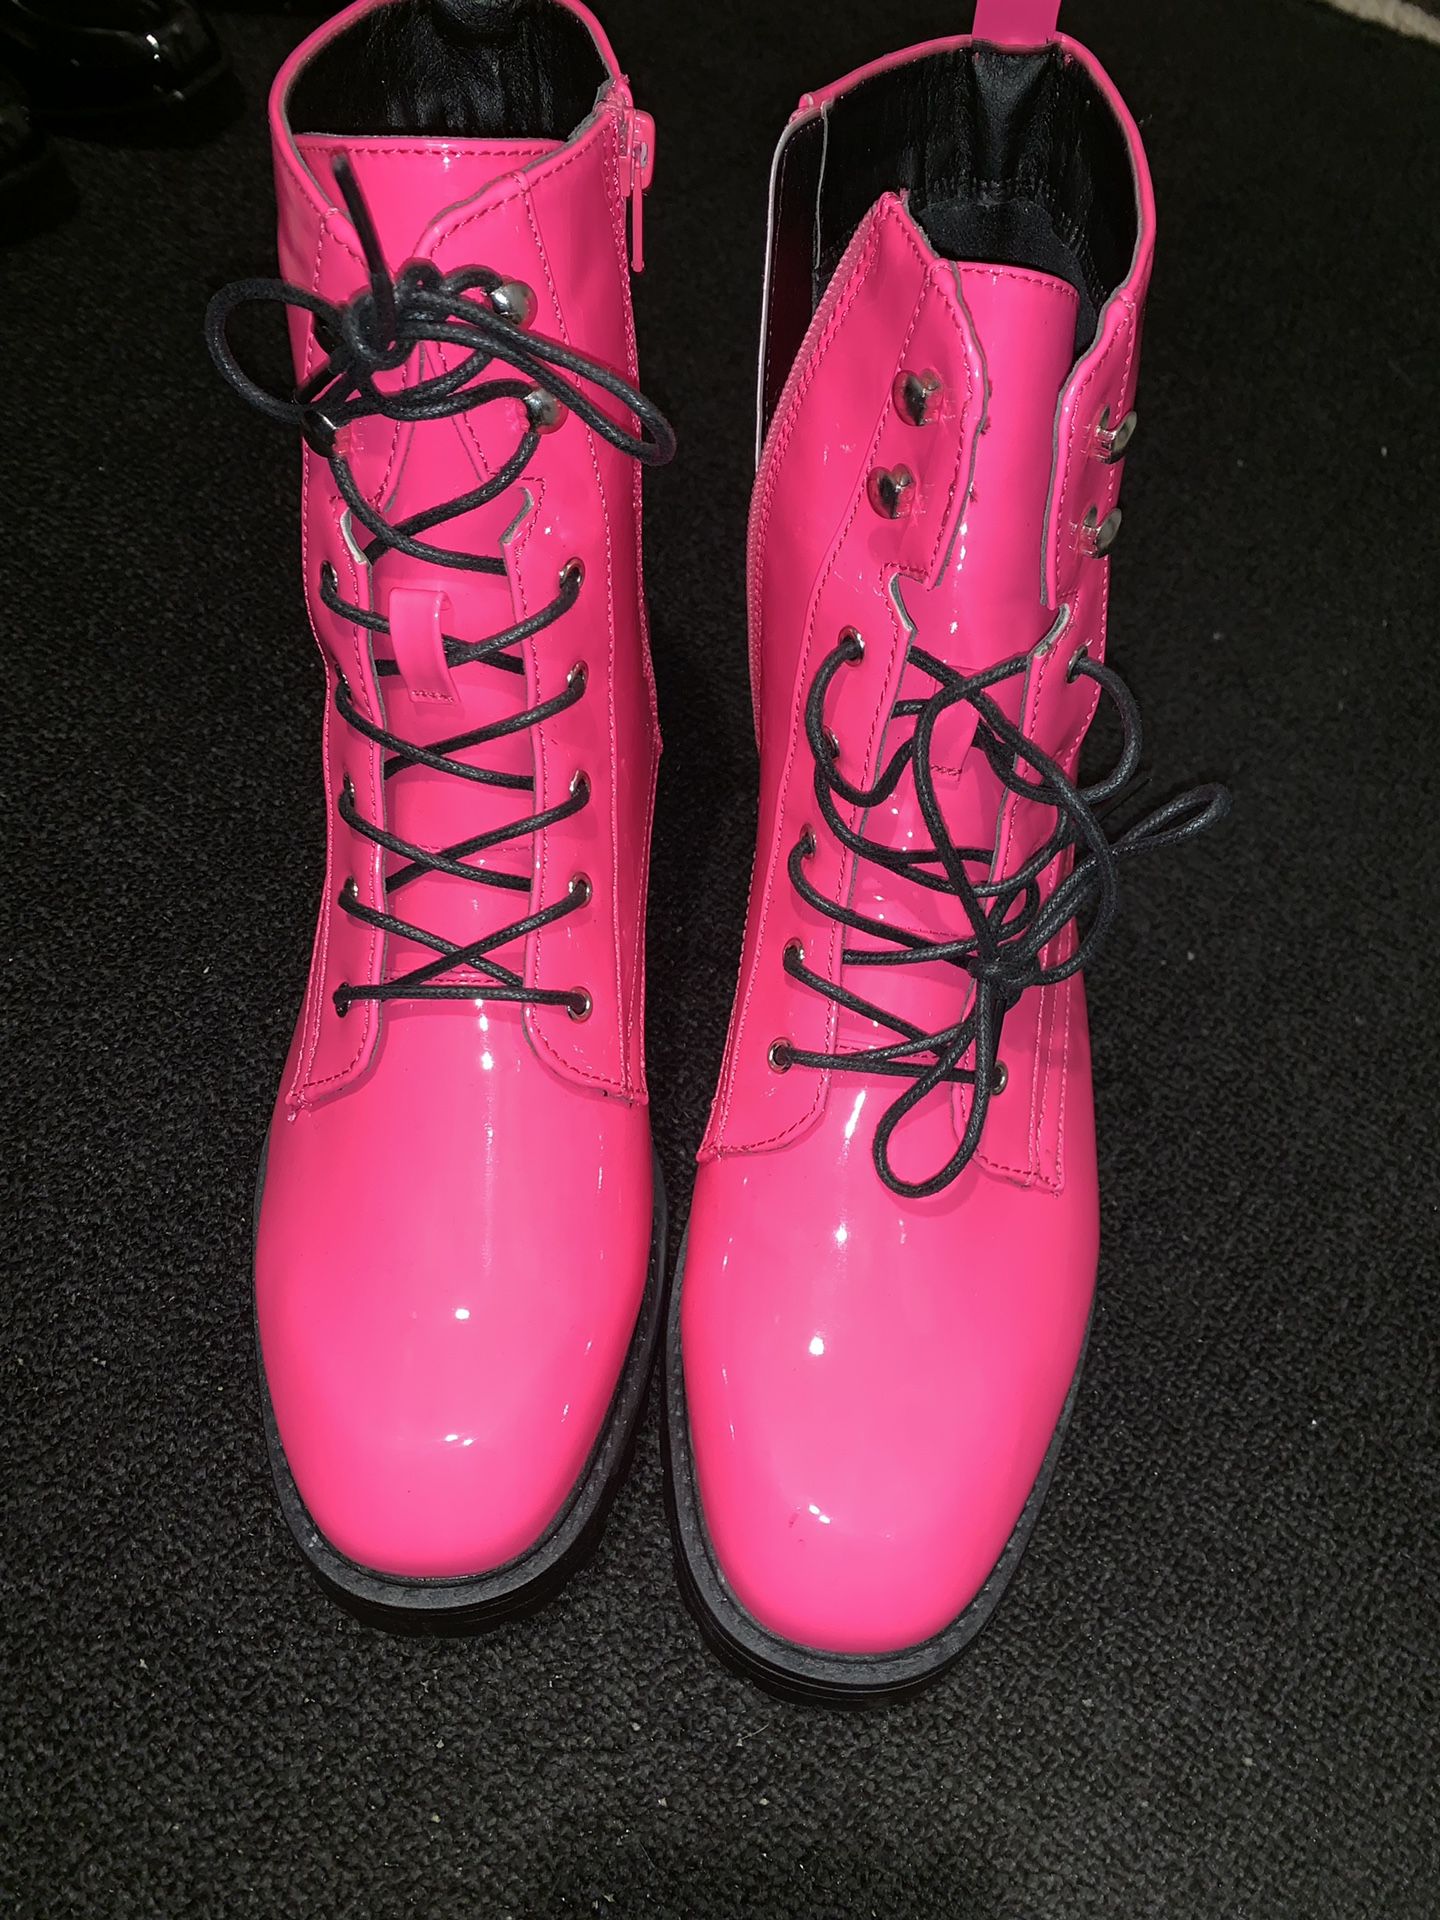 Neon pink ankle boots size 10*true to size